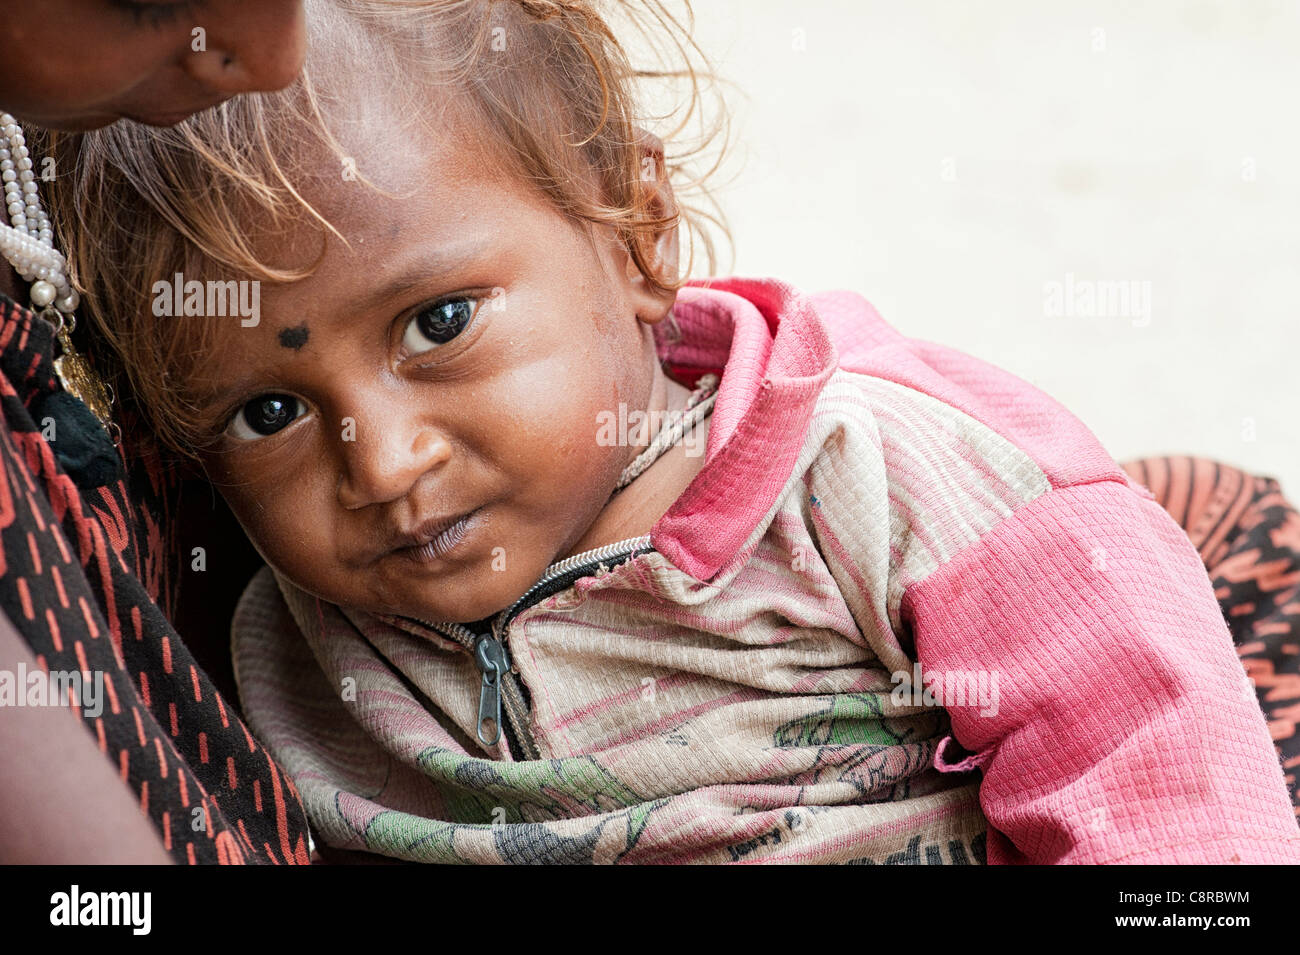 Young poor lower caste Indian street baby boy Stock Photo